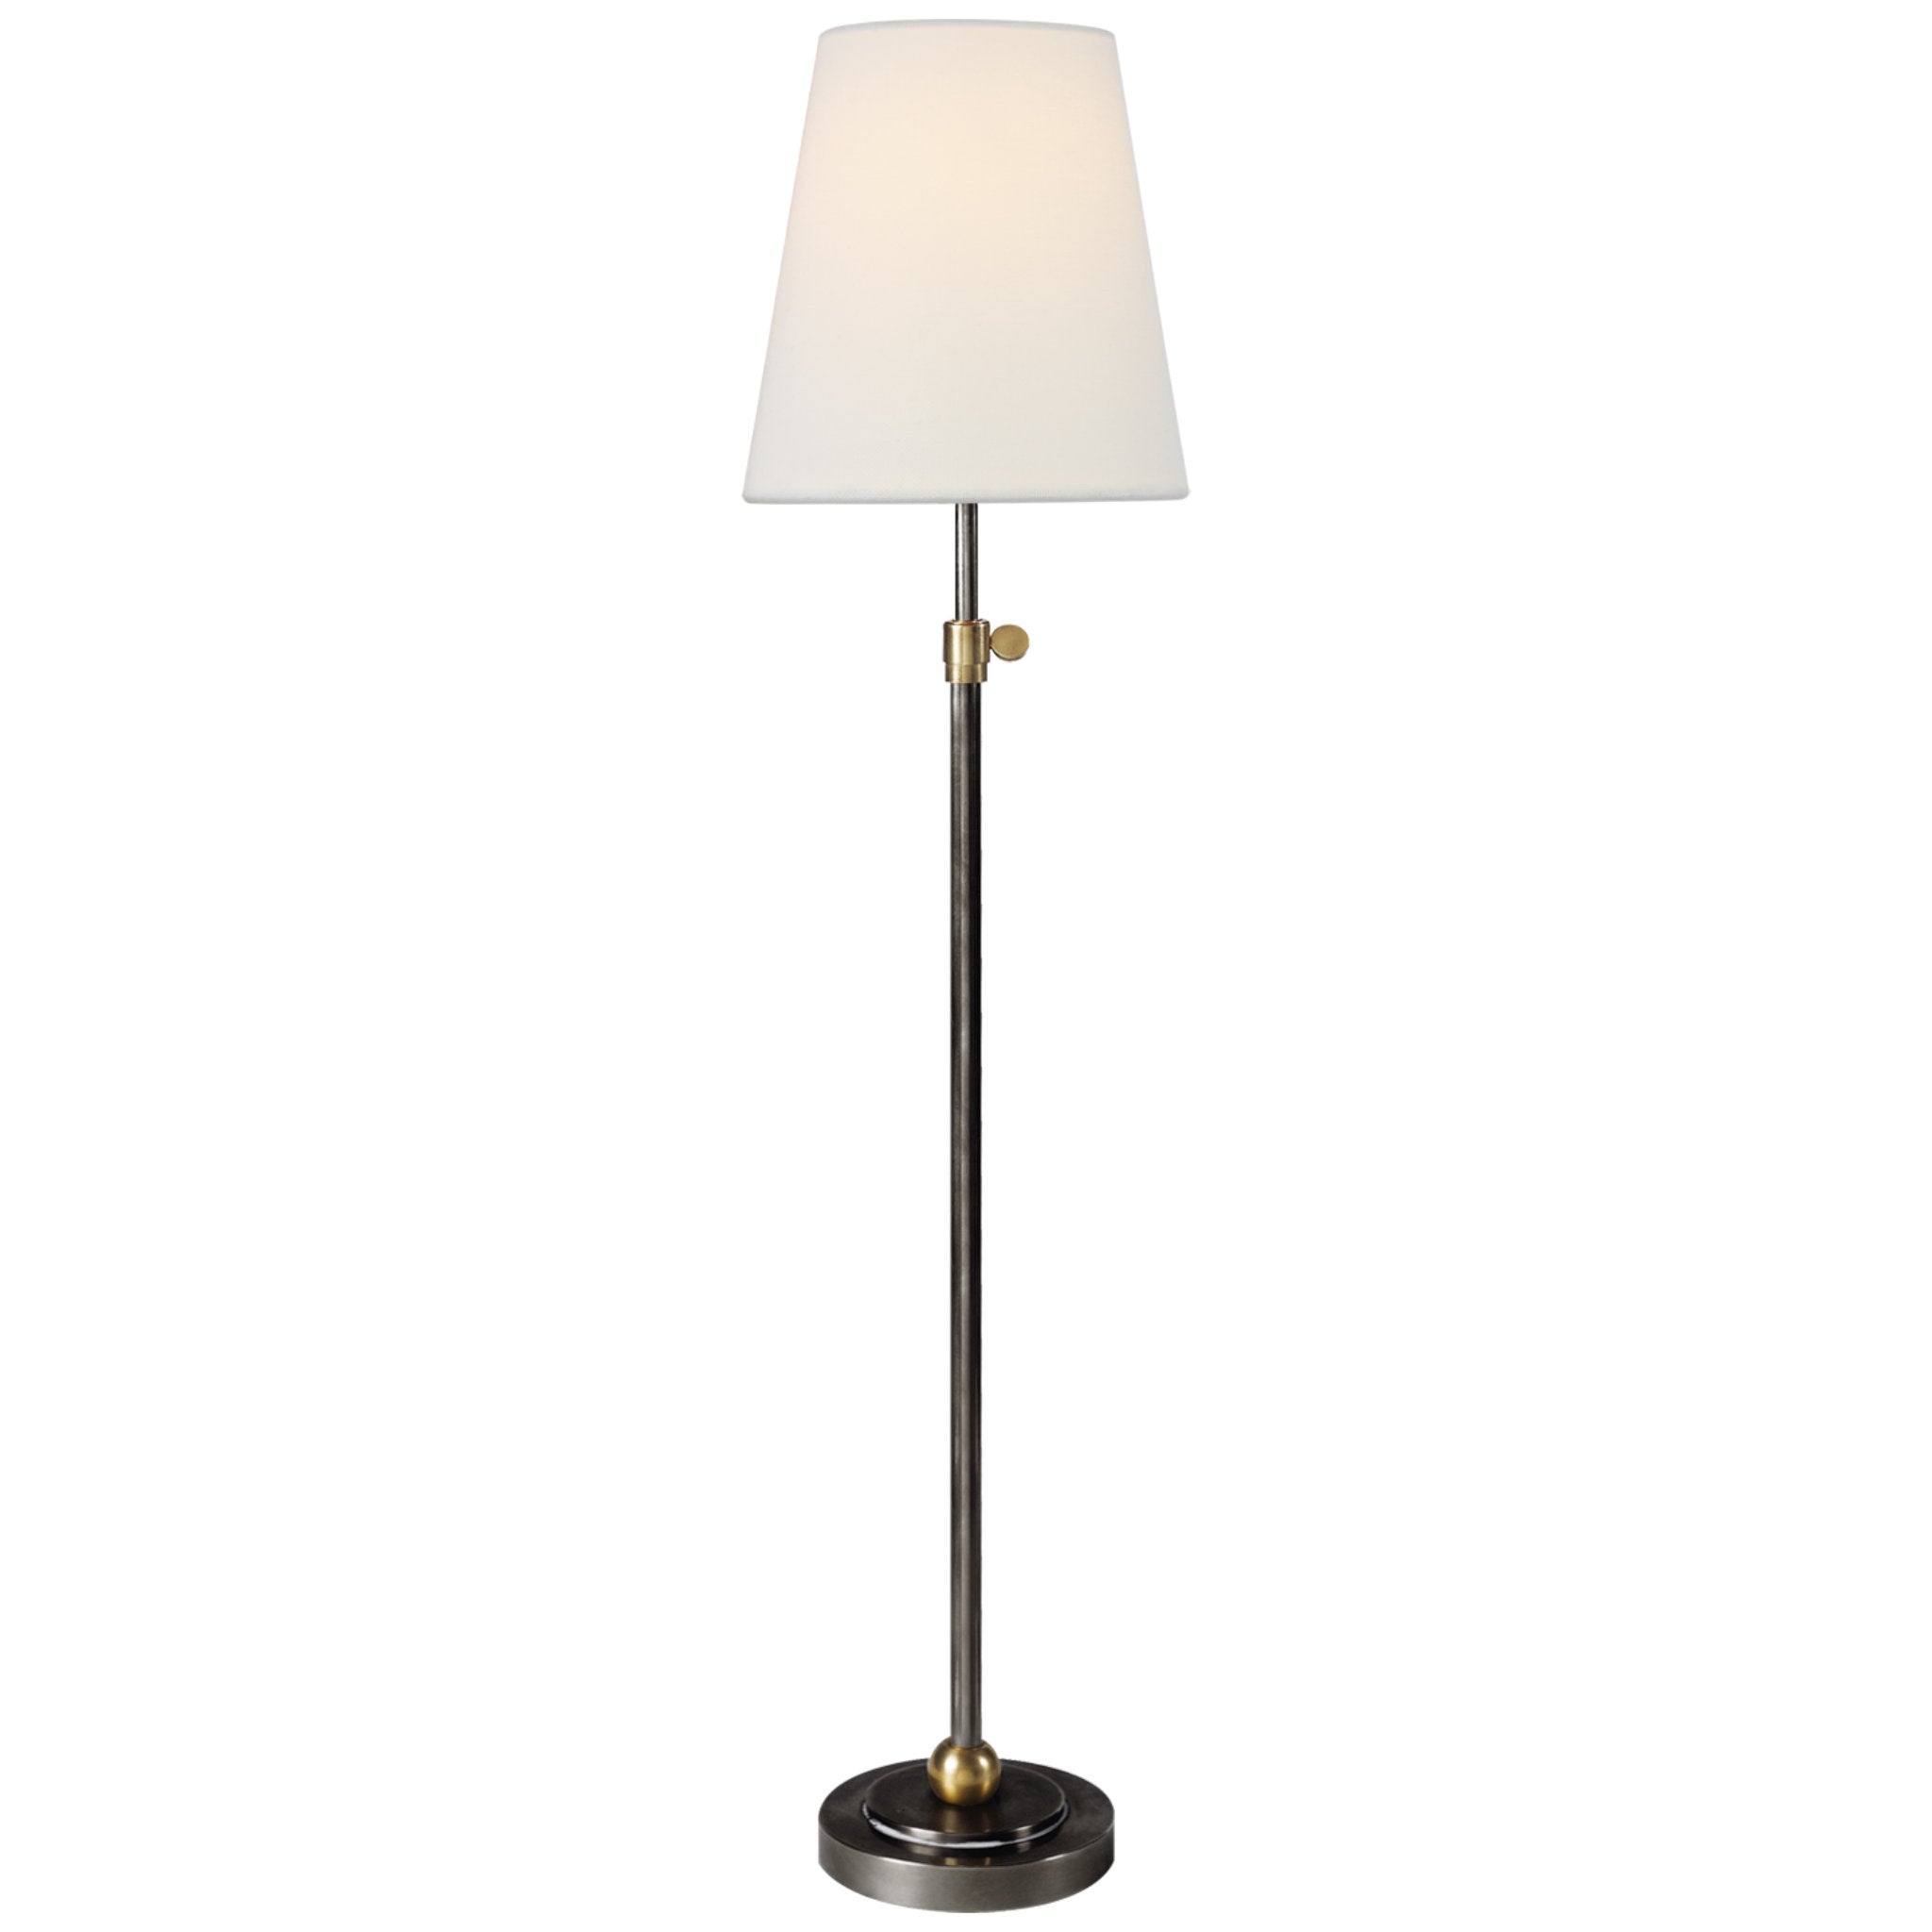 Thomas O'Brien Bryant Table Lamp in Bronze and Hand-Rubbed Antique Brass with Linen Shade